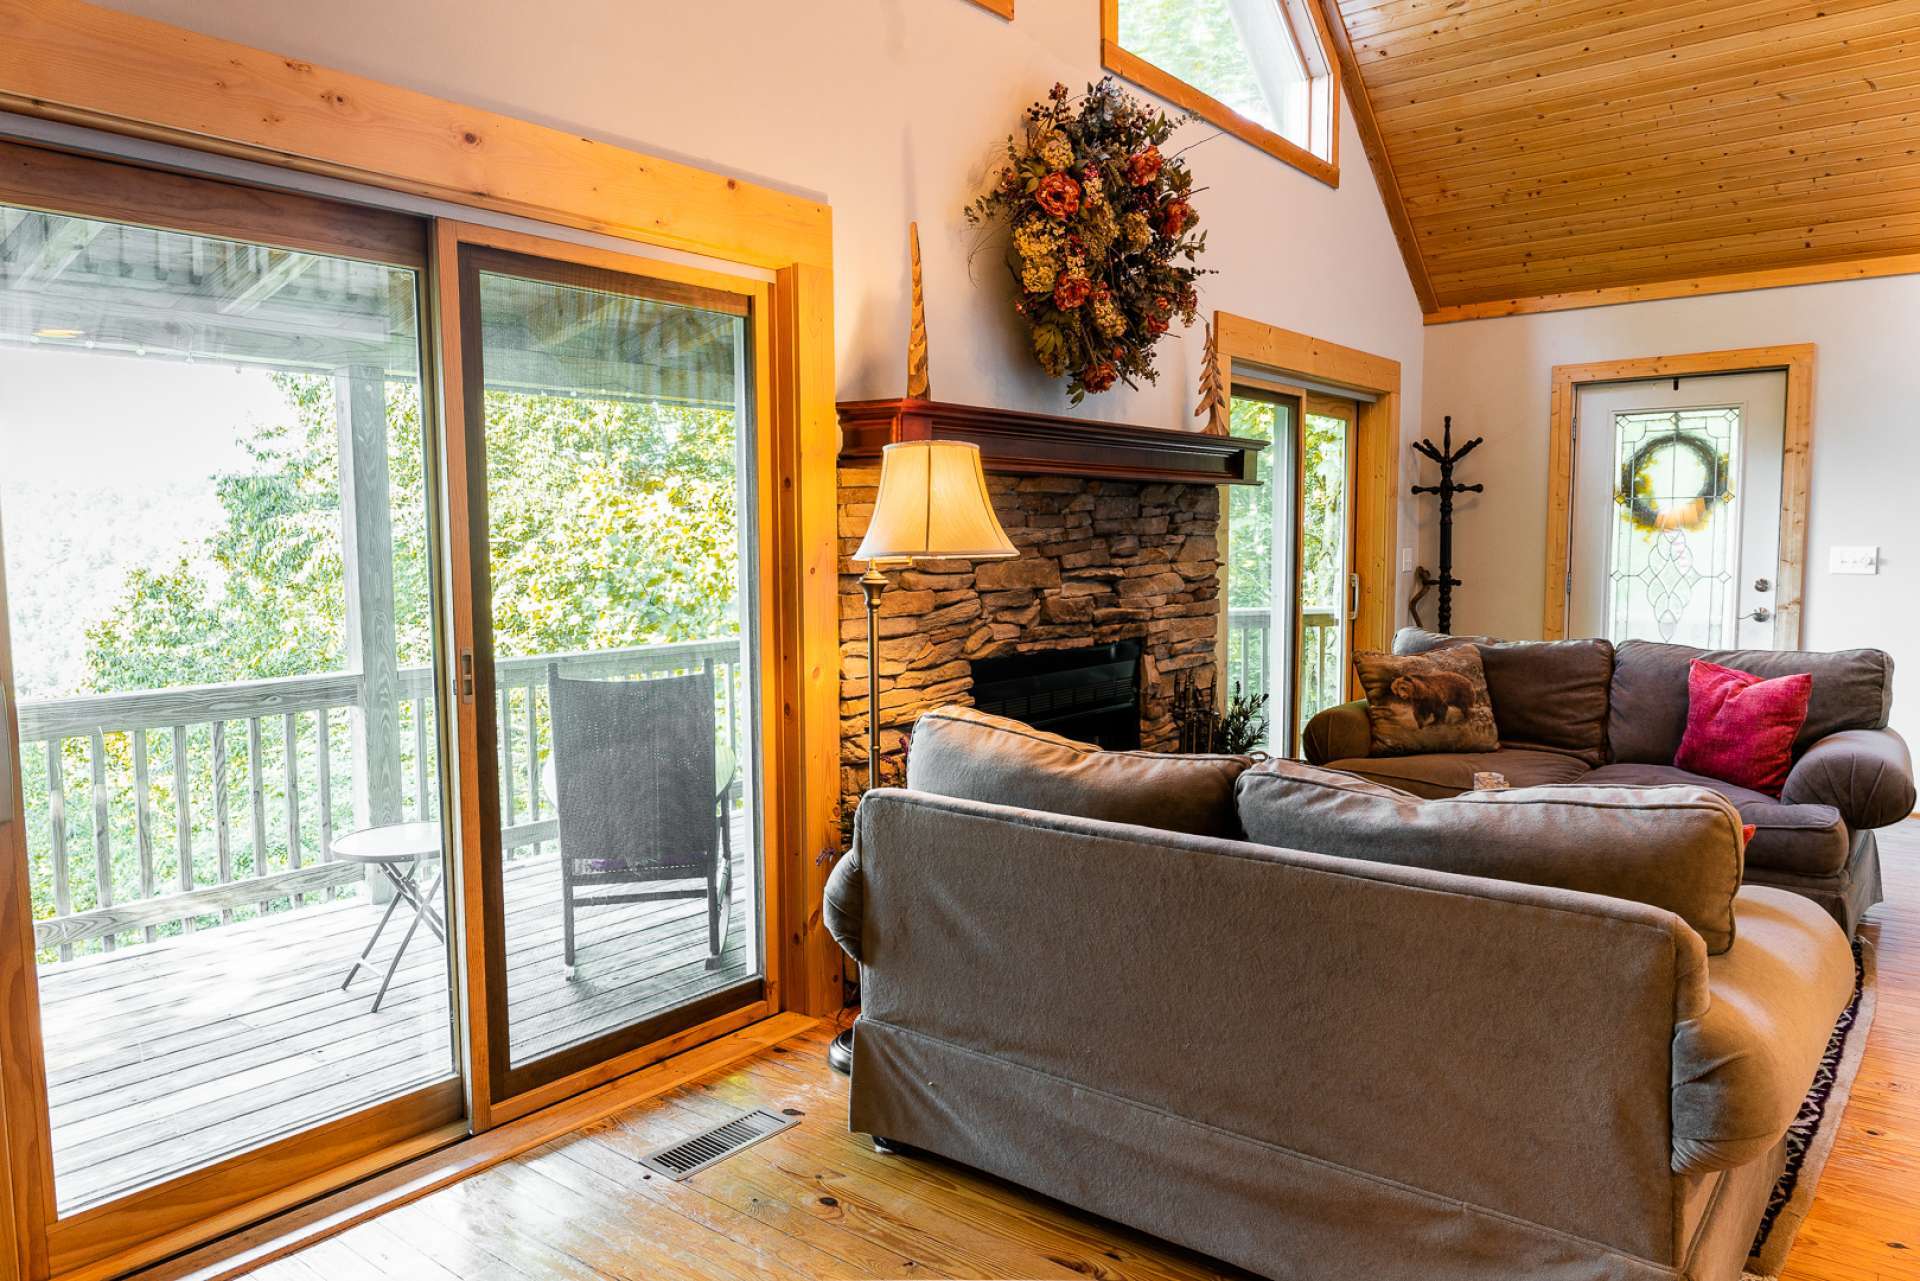 The living area features wood floors, a stone fireplace to warm up those cool winter evenings, and a wall of windows filling the space with natural light.